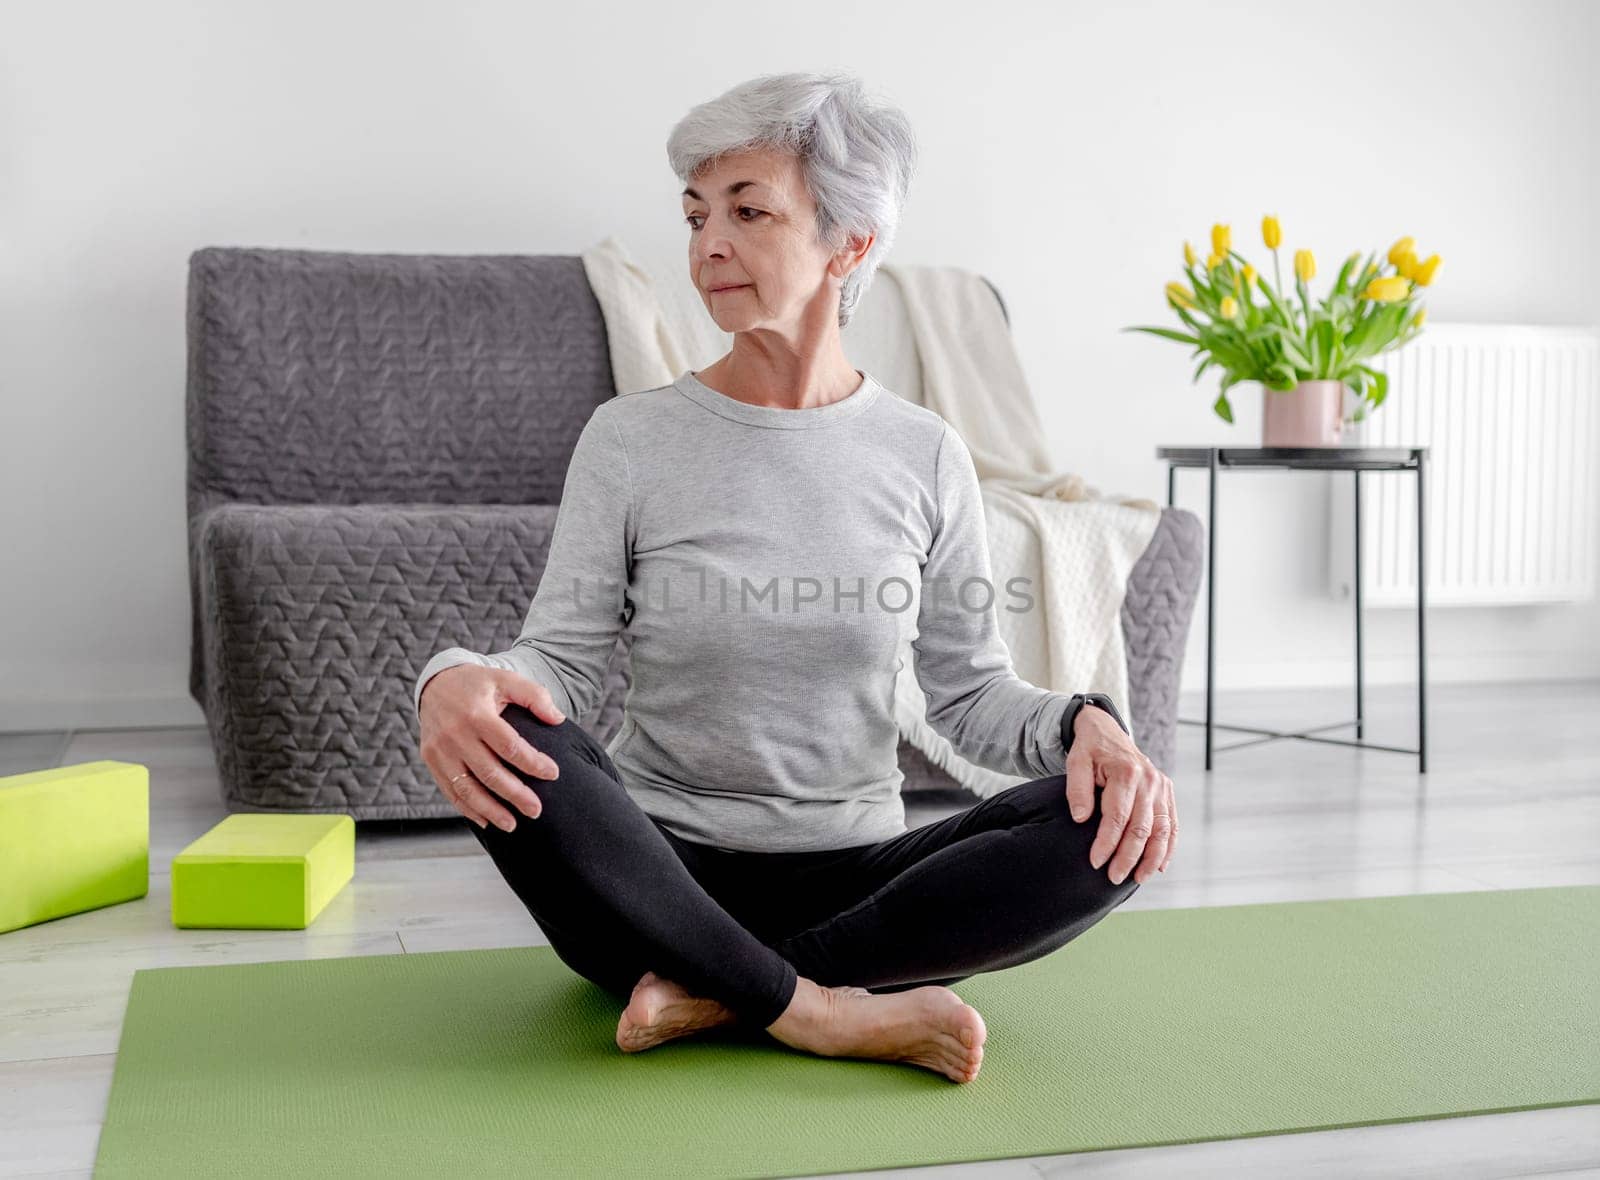 Woman Over 60 Practices Yoga At Home In A Bright Room